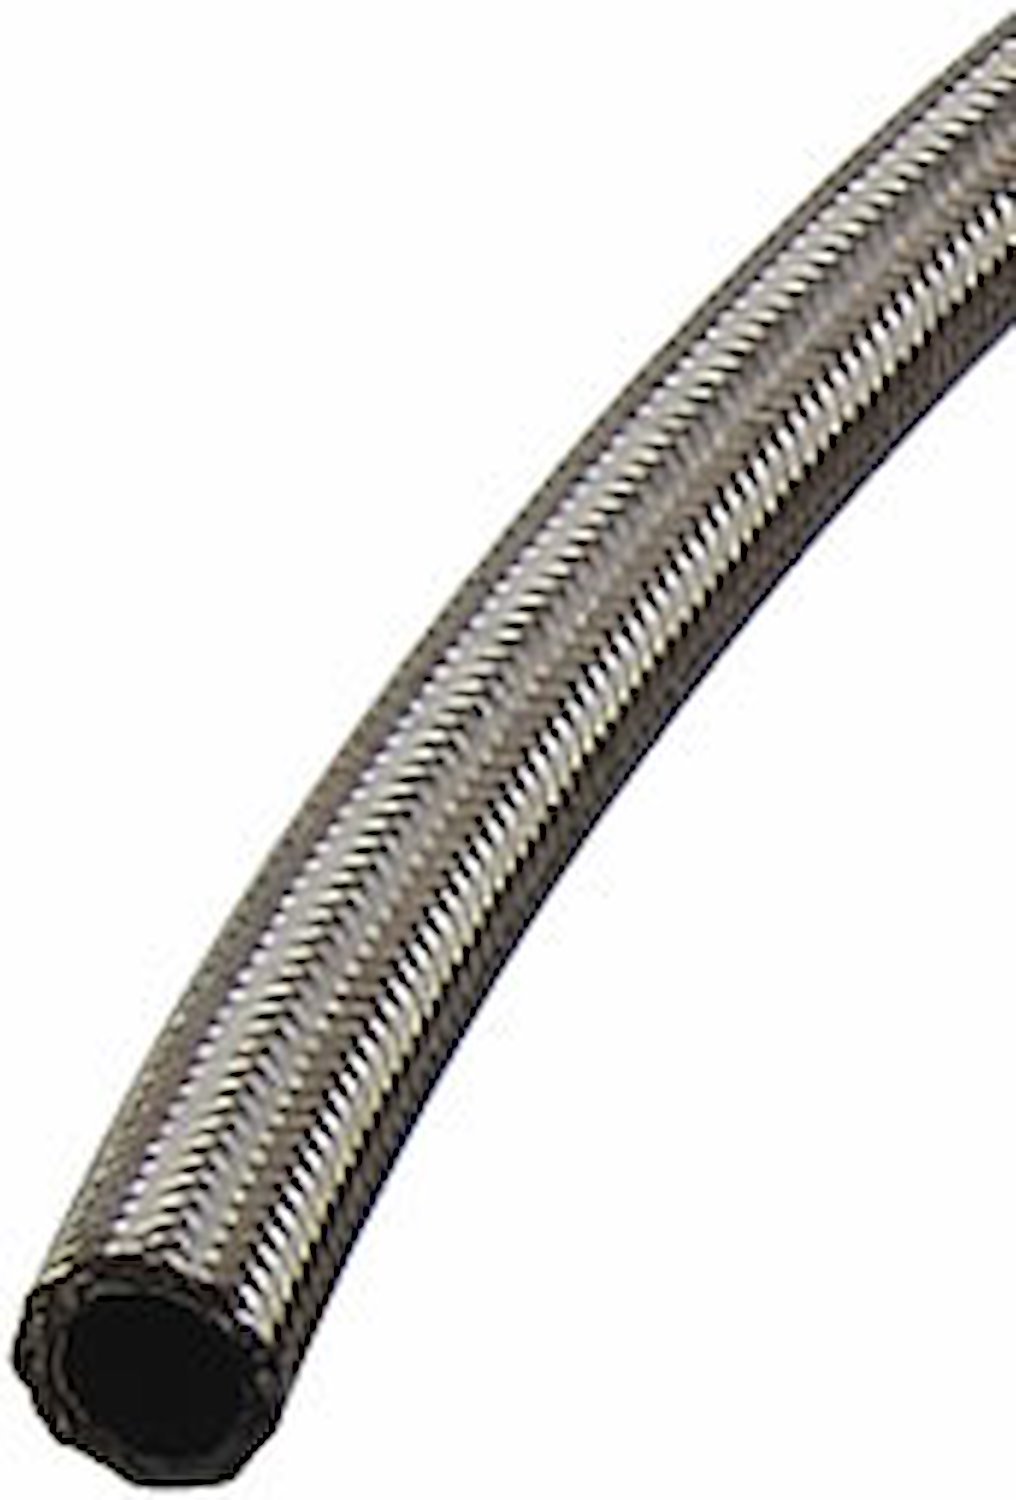 Pro-Flo 200 Series Stainless Steel Braided Hose -12